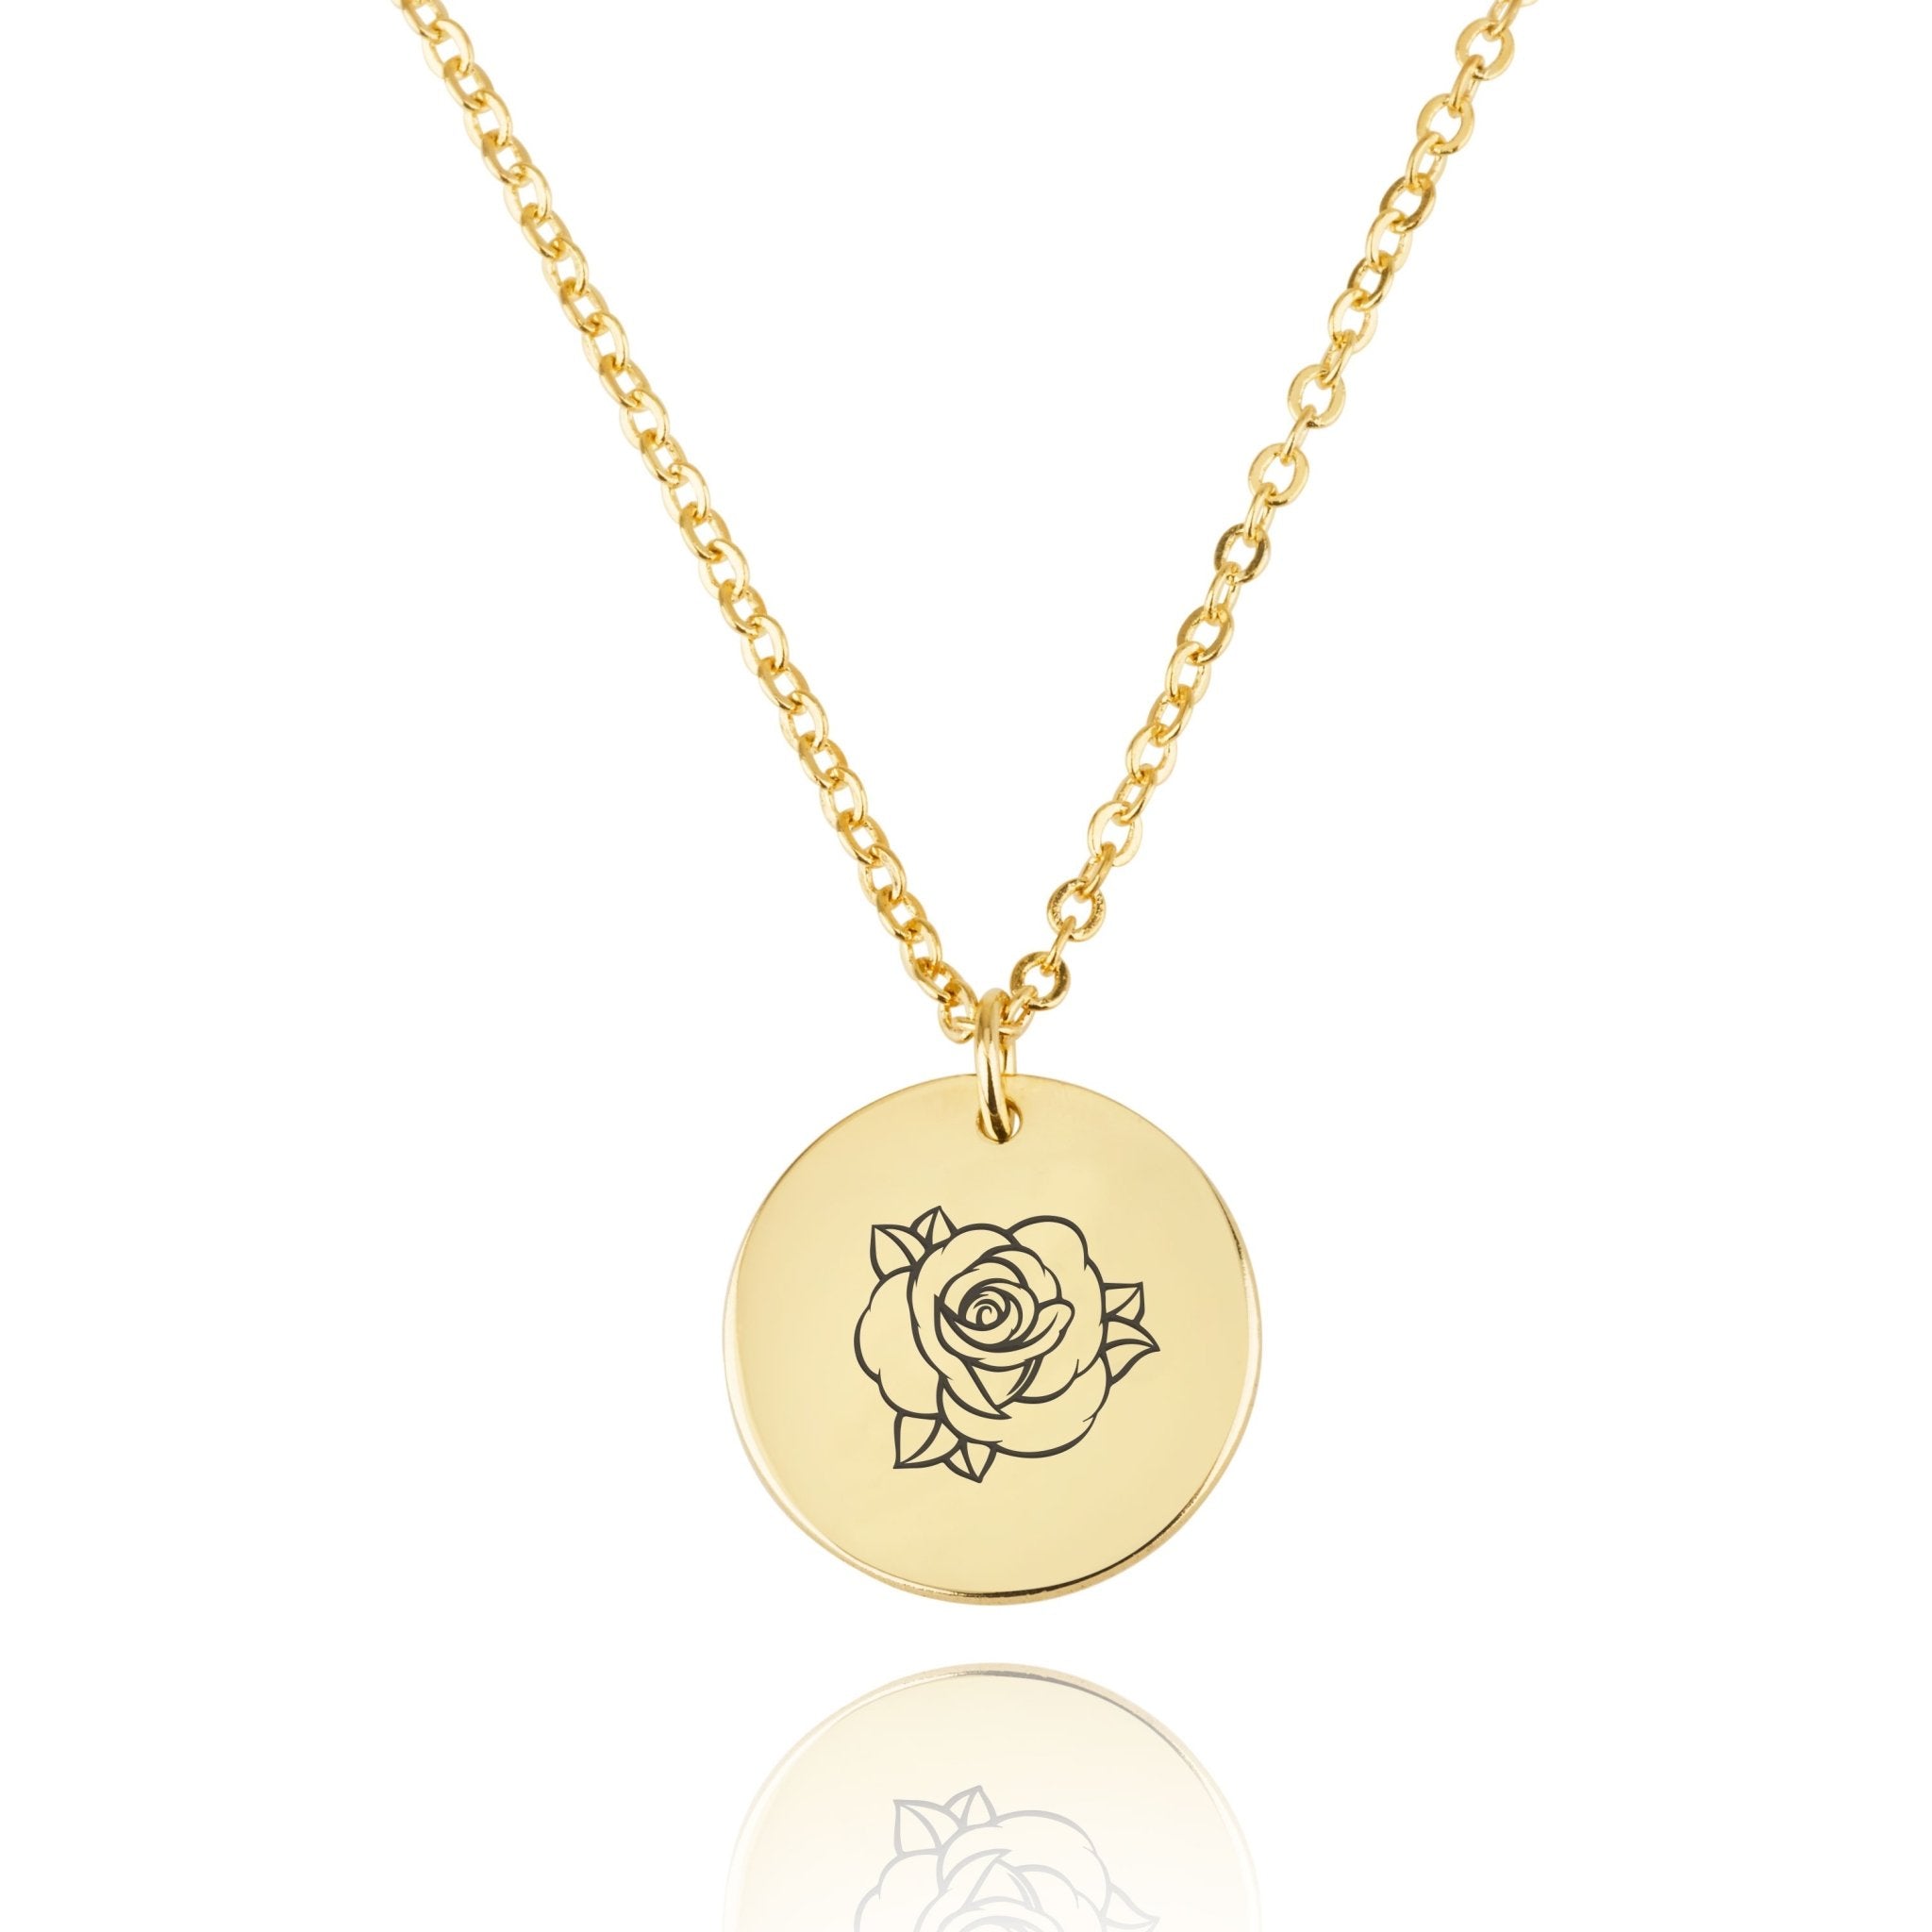 Personalised Arabic Initial or Name Engraved Disc Necklace Comes with Gift  Box | eBay